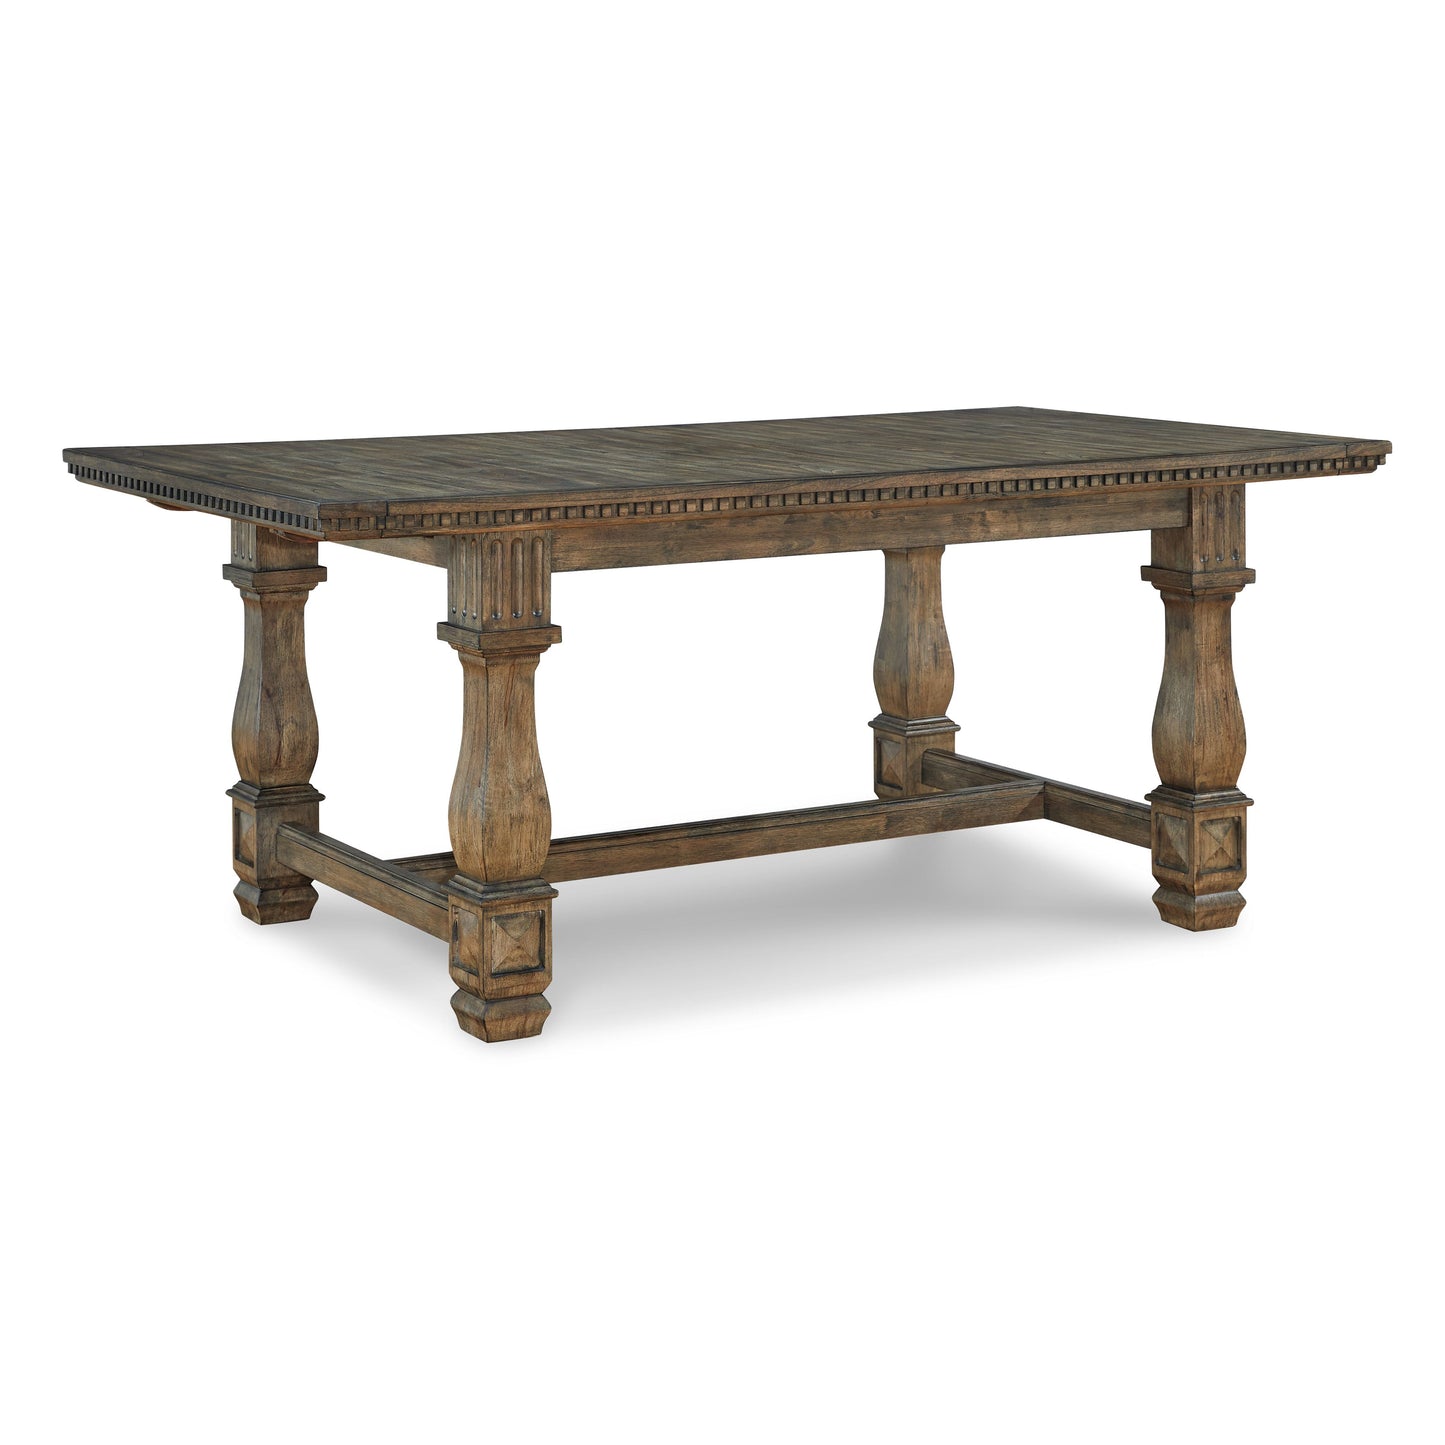 MARKENBURG EXTENSION DINING TABLE - BROWN